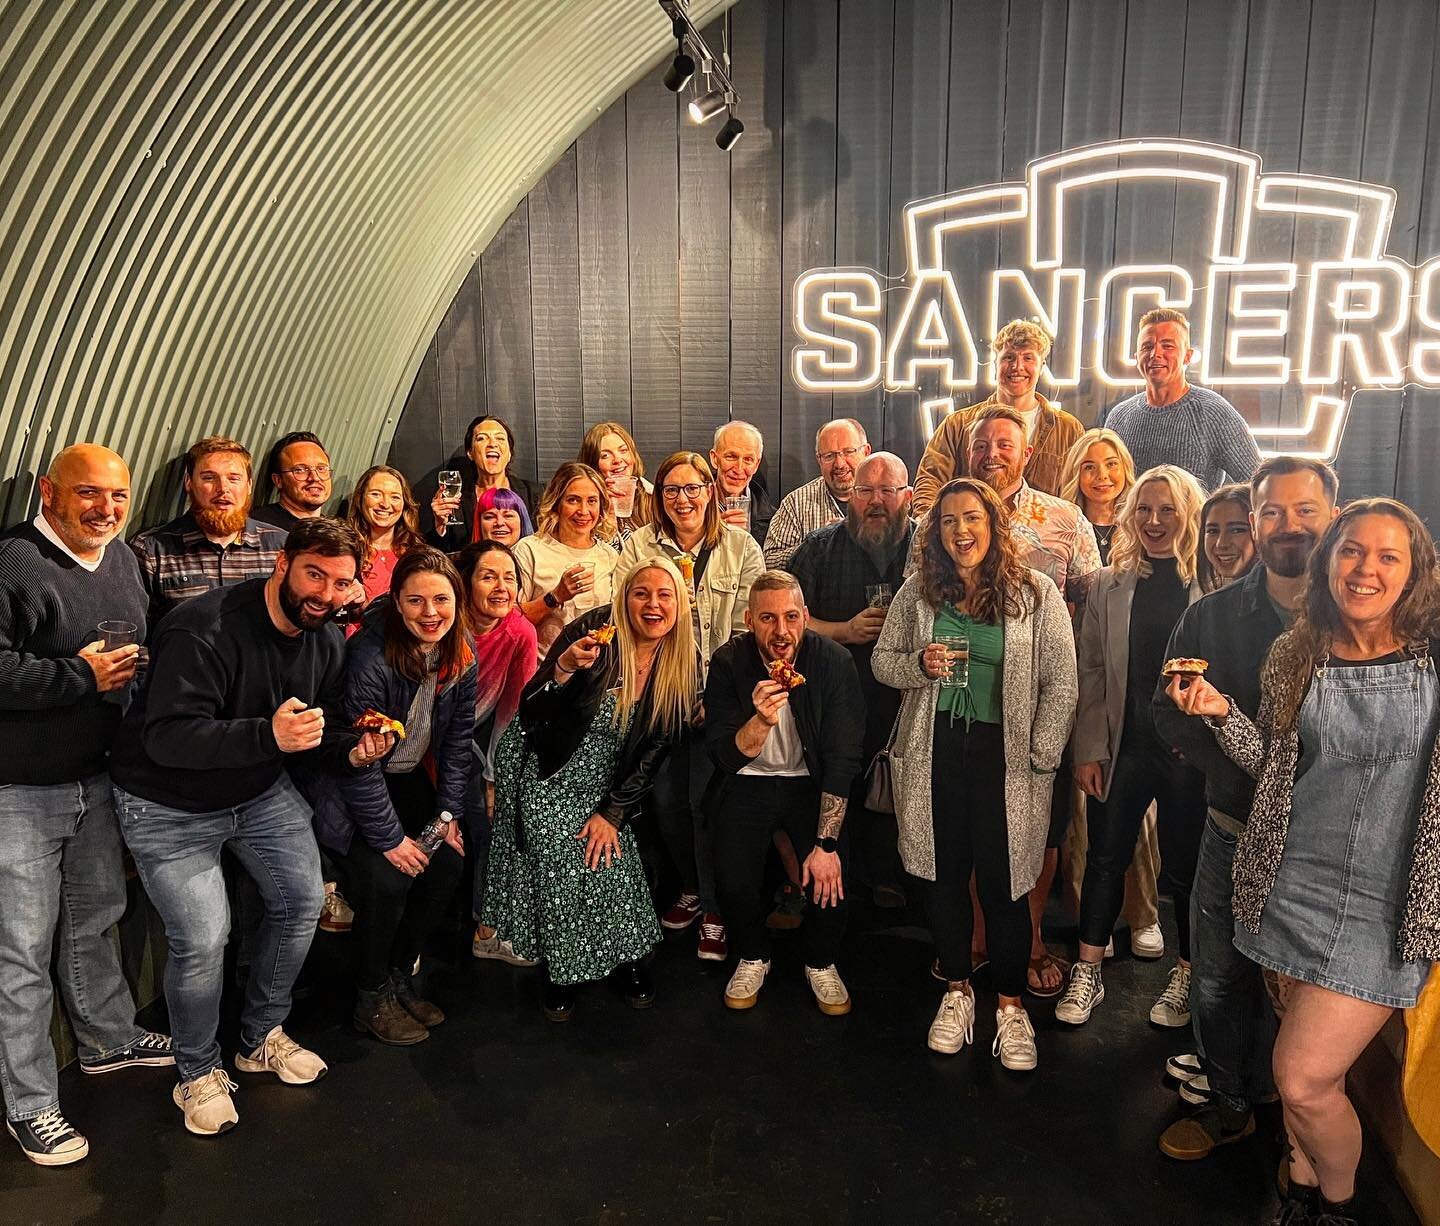 Squad goals&hellip; What a night.

Thanks to everyone that came out for our latest &lsquo;out of gym&rsquo; get together. 

The company, food and beers were all exceptional! 

Thanks to

@sangers.deli for the 🍕
@thearchrivals for the 🍻

And the @_r